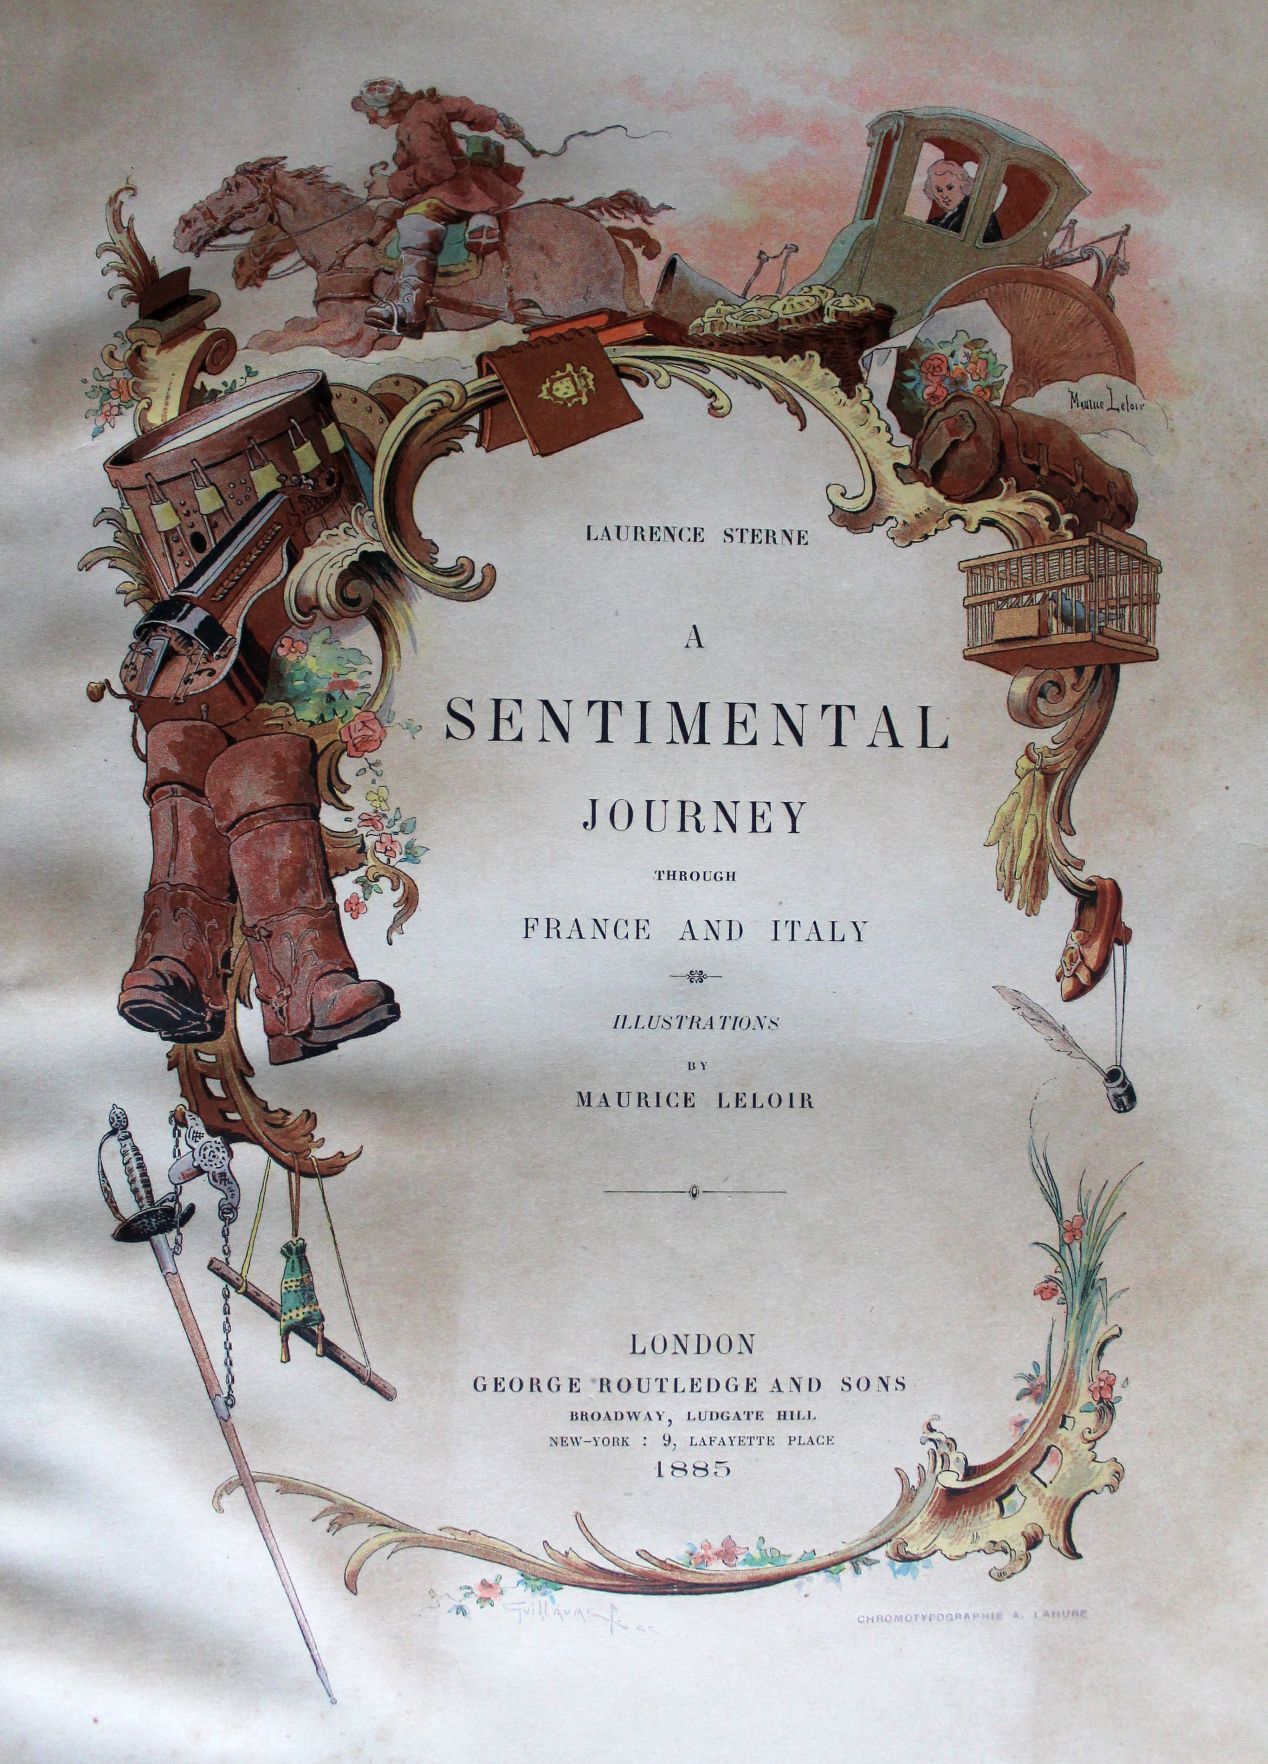 laurence sterne a sentimental journey summary